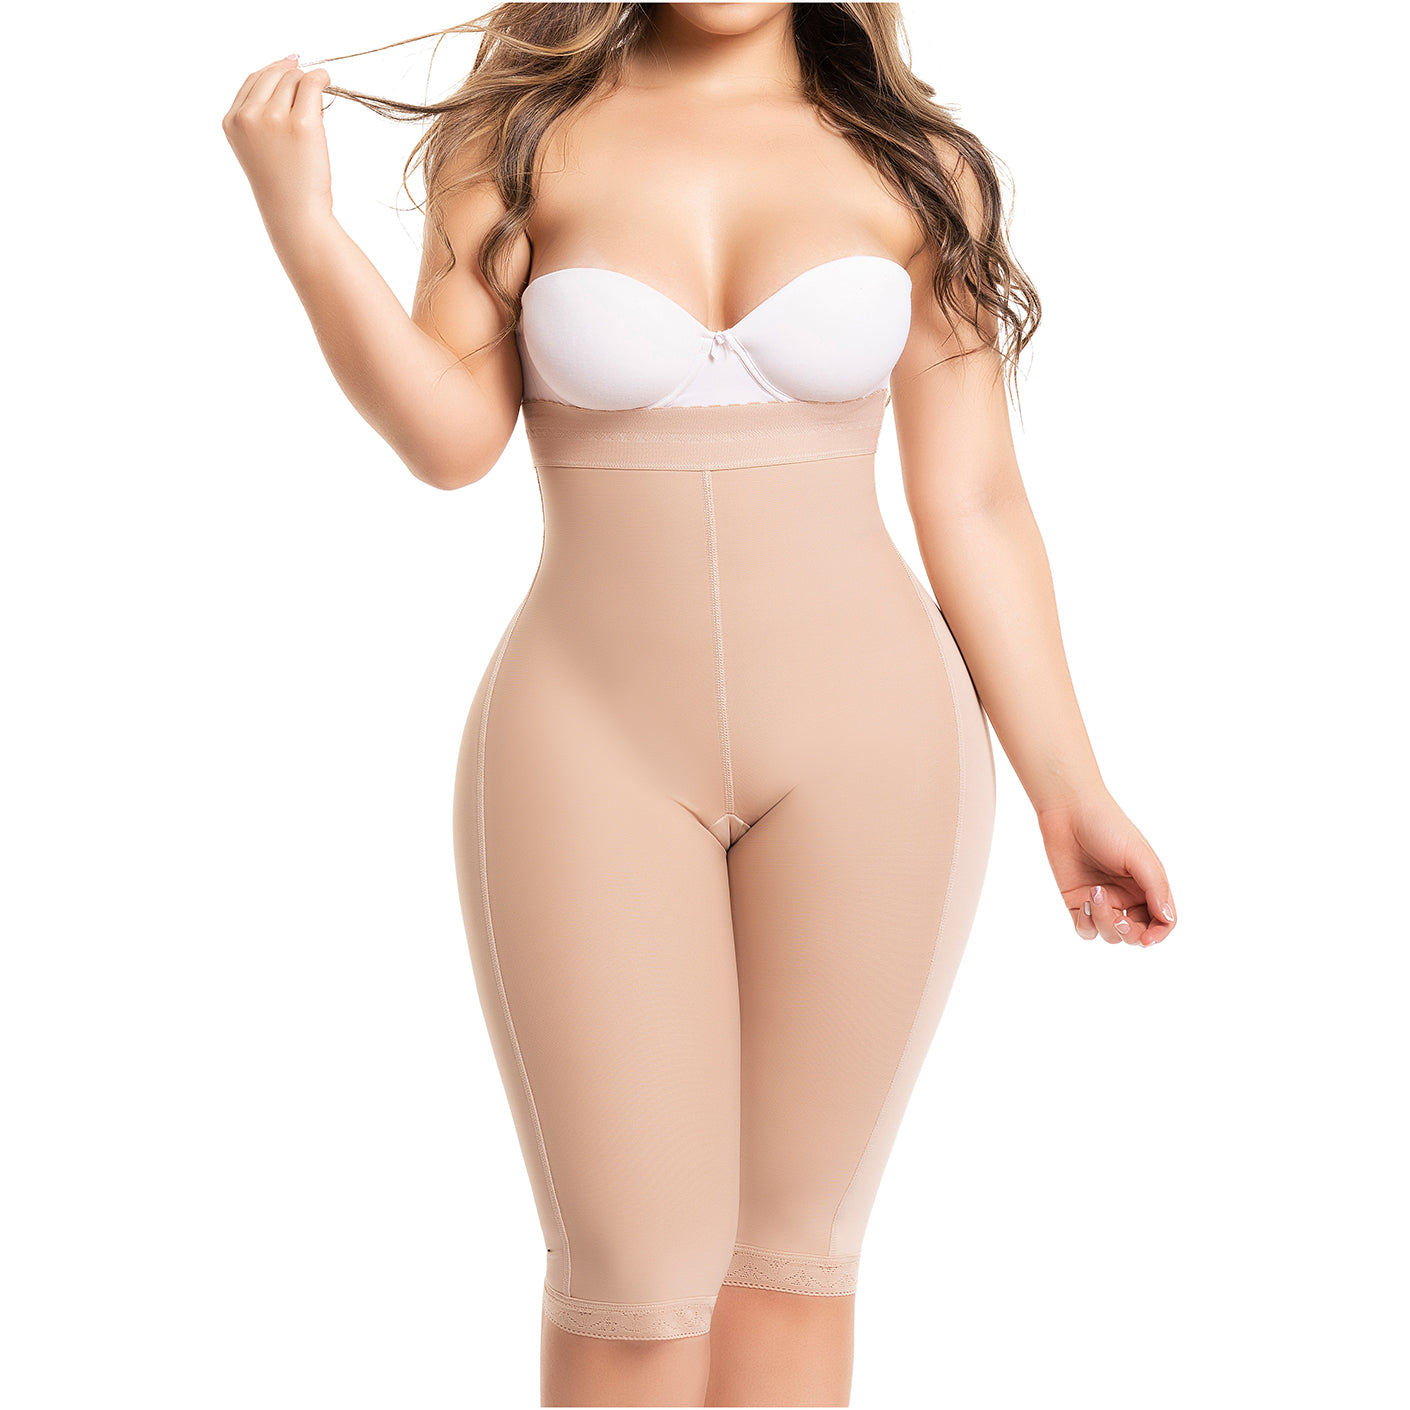 Salome Post Surgical Girdle with Open Holes (0529) - Catherines